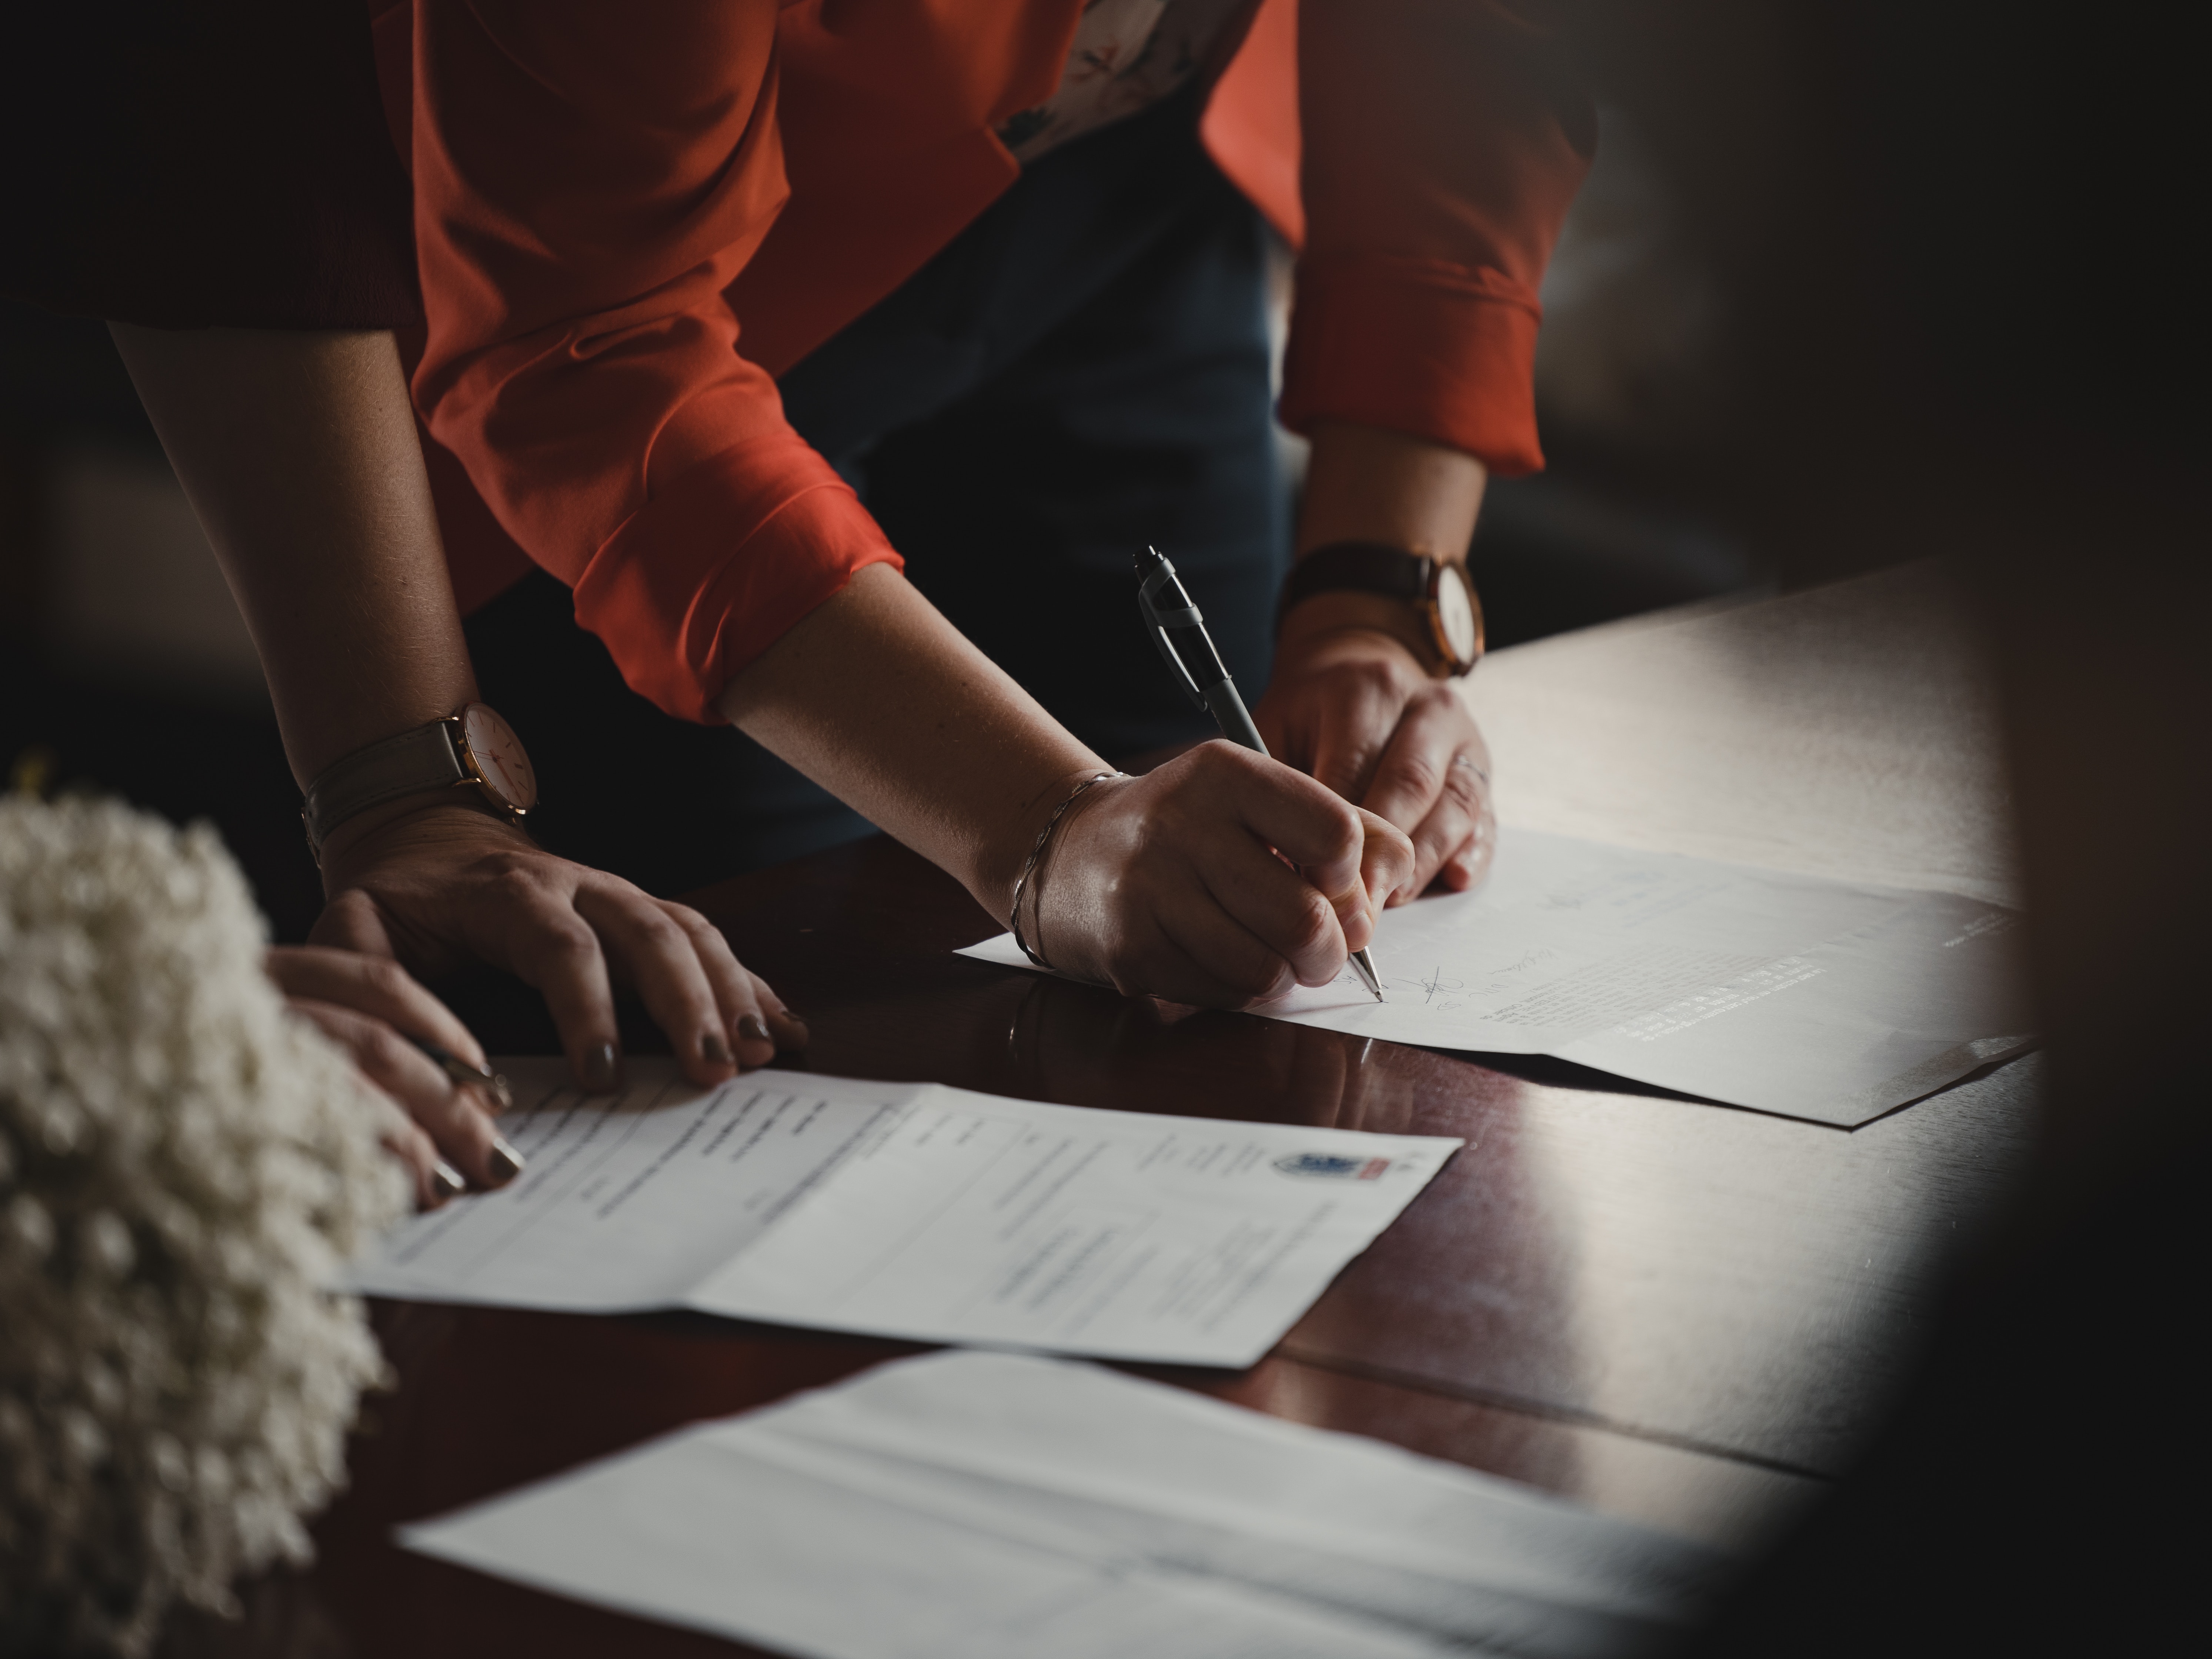 Disclosures of Every Tenant Needs Before Signing a Lease Agreement in New South Wales